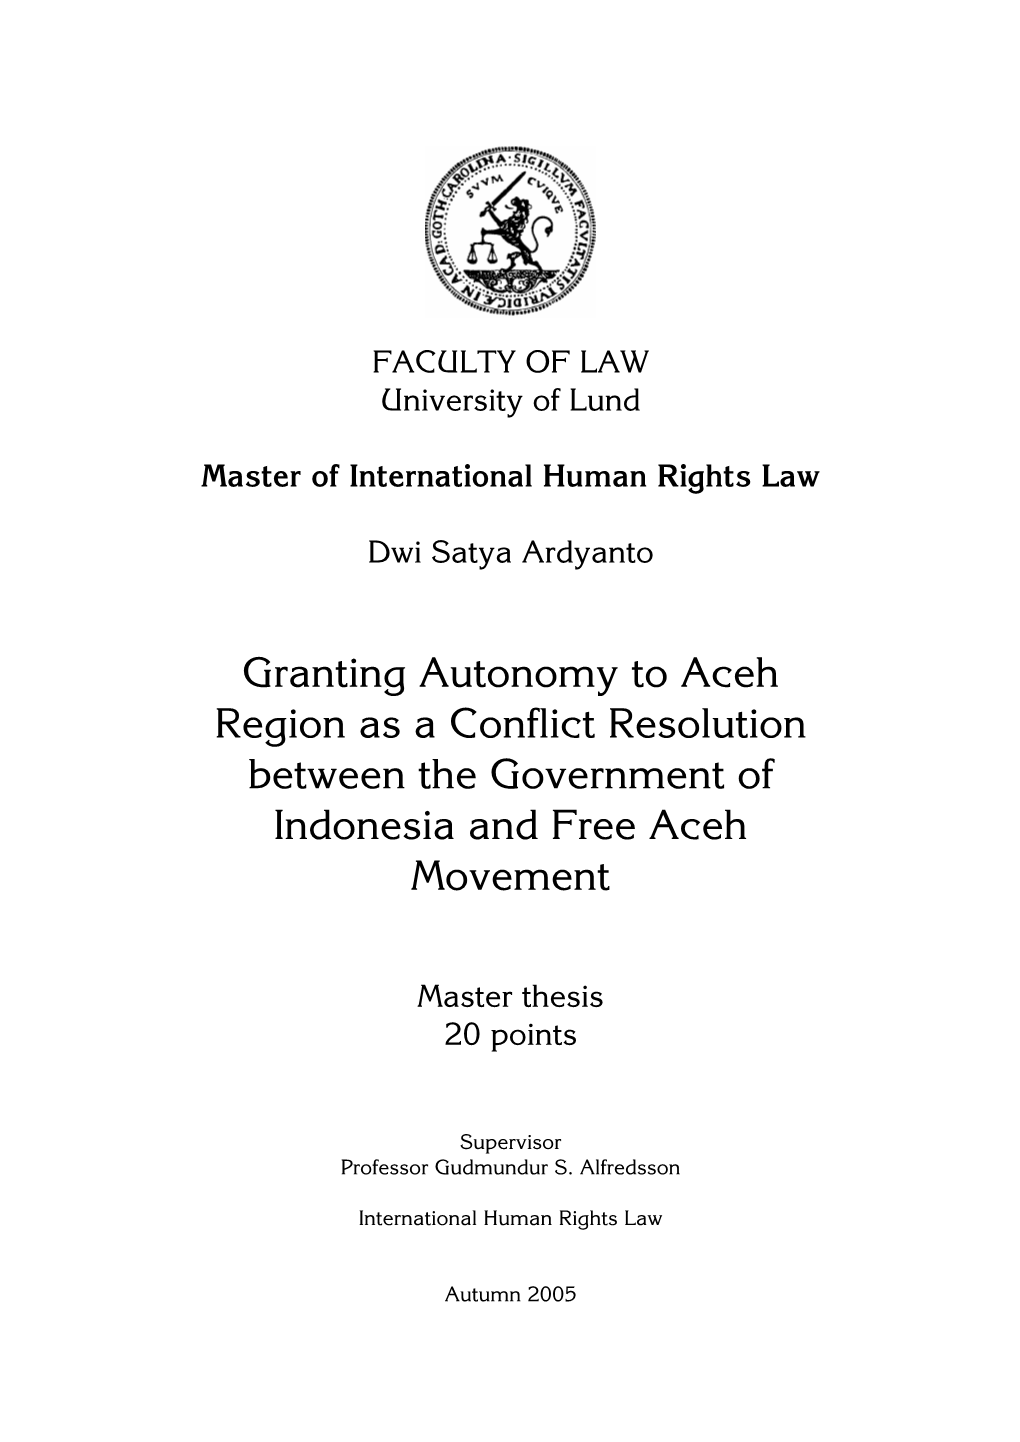 Granting Autonomy to Aceh Region As a Conflict Resolution Between the Government of Indonesia and Free Aceh Movement